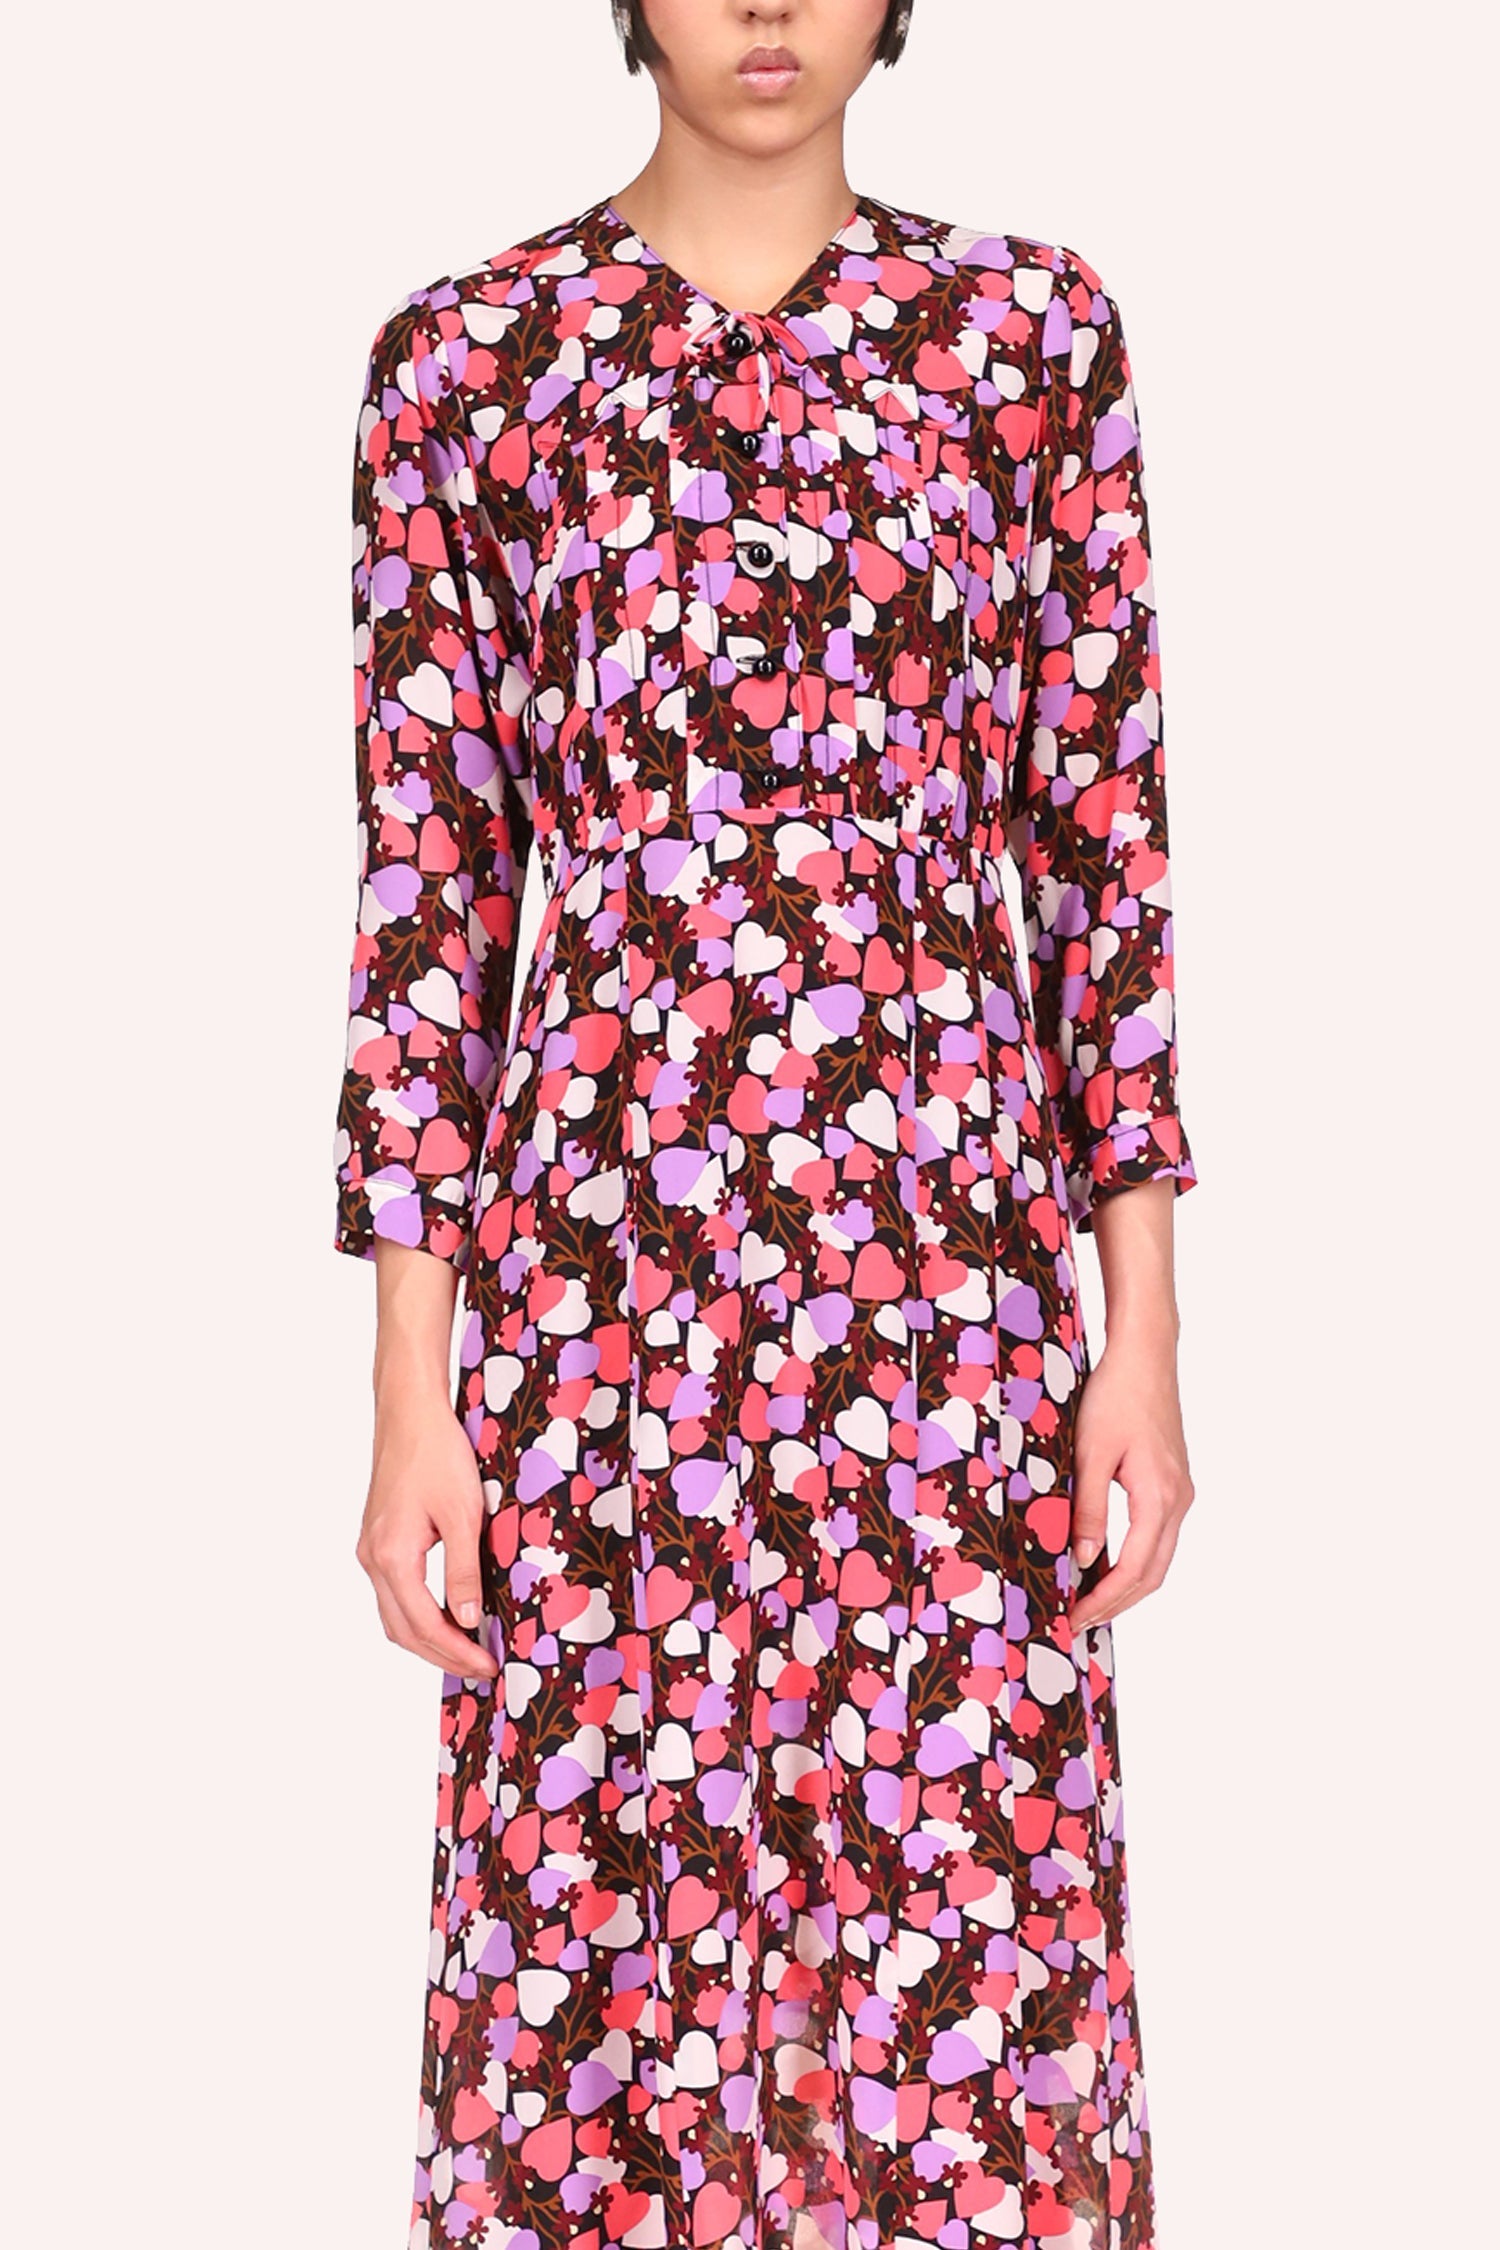 Blooming Hearts Dress<br> Lavender Multi - Anna Sui